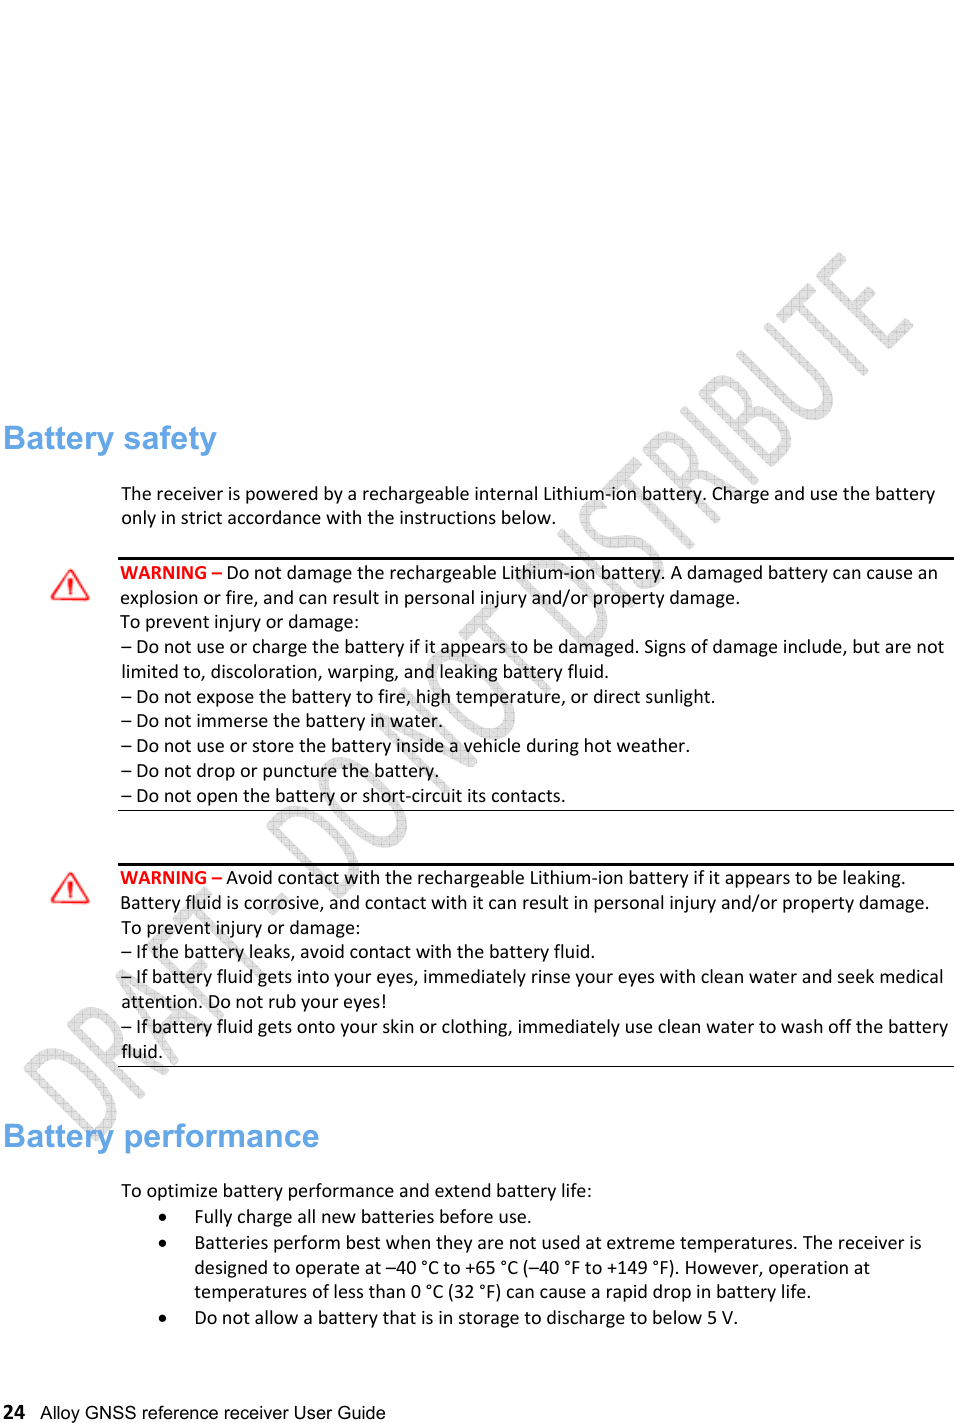   24   Alloy GNSS reference receiver User Guide                     Battery safety  The receiver is powered by a rechargeable internal Lithium-ion battery. Charge and use the battery only in strict accordance with the instructions below.  WARNING – Do not damage the rechargeable Lithium-ion battery. A damaged battery can cause an explosion or fire, and can result in personal injury and/or property damage. To prevent injury or damage: – Do not use or charge the battery if it appears to be damaged. Signs of damage include, but are not limited to, discoloration, warping, and leaking battery fluid. – Do not expose the battery to fire, high temperature, or direct sunlight. – Do not immerse the battery in water. – Do not use or store the battery inside a vehicle during hot weather. – Do not drop or puncture the battery. – Do not open the battery or short-circuit its contacts.   WARNING – Avoid contact with the rechargeable Lithium-ion battery if it appears to be leaking. Battery fluid is corrosive, and contact with it can result in personal injury and/or property damage. To prevent injury or damage: – If the battery leaks, avoid contact with the battery fluid. – If battery fluid gets into your eyes, immediately rinse your eyes with clean water and seek medical attention. Do not rub your eyes! – If battery fluid gets onto your skin or clothing, immediately use clean water to wash off the battery fluid.   Battery performance  To optimize battery performance and extend battery life: • Fully charge all new batteries before use. • Batteries perform best when they are not used at extreme temperatures. The receiver is designed to operate at –40 °C to +65 °C (–40 °F to +149 °F). However, operation at temperatures of less than 0 °C (32 °F) can cause a rapid drop in battery life. • Do not allow a battery that is in storage to discharge to below 5 V.  